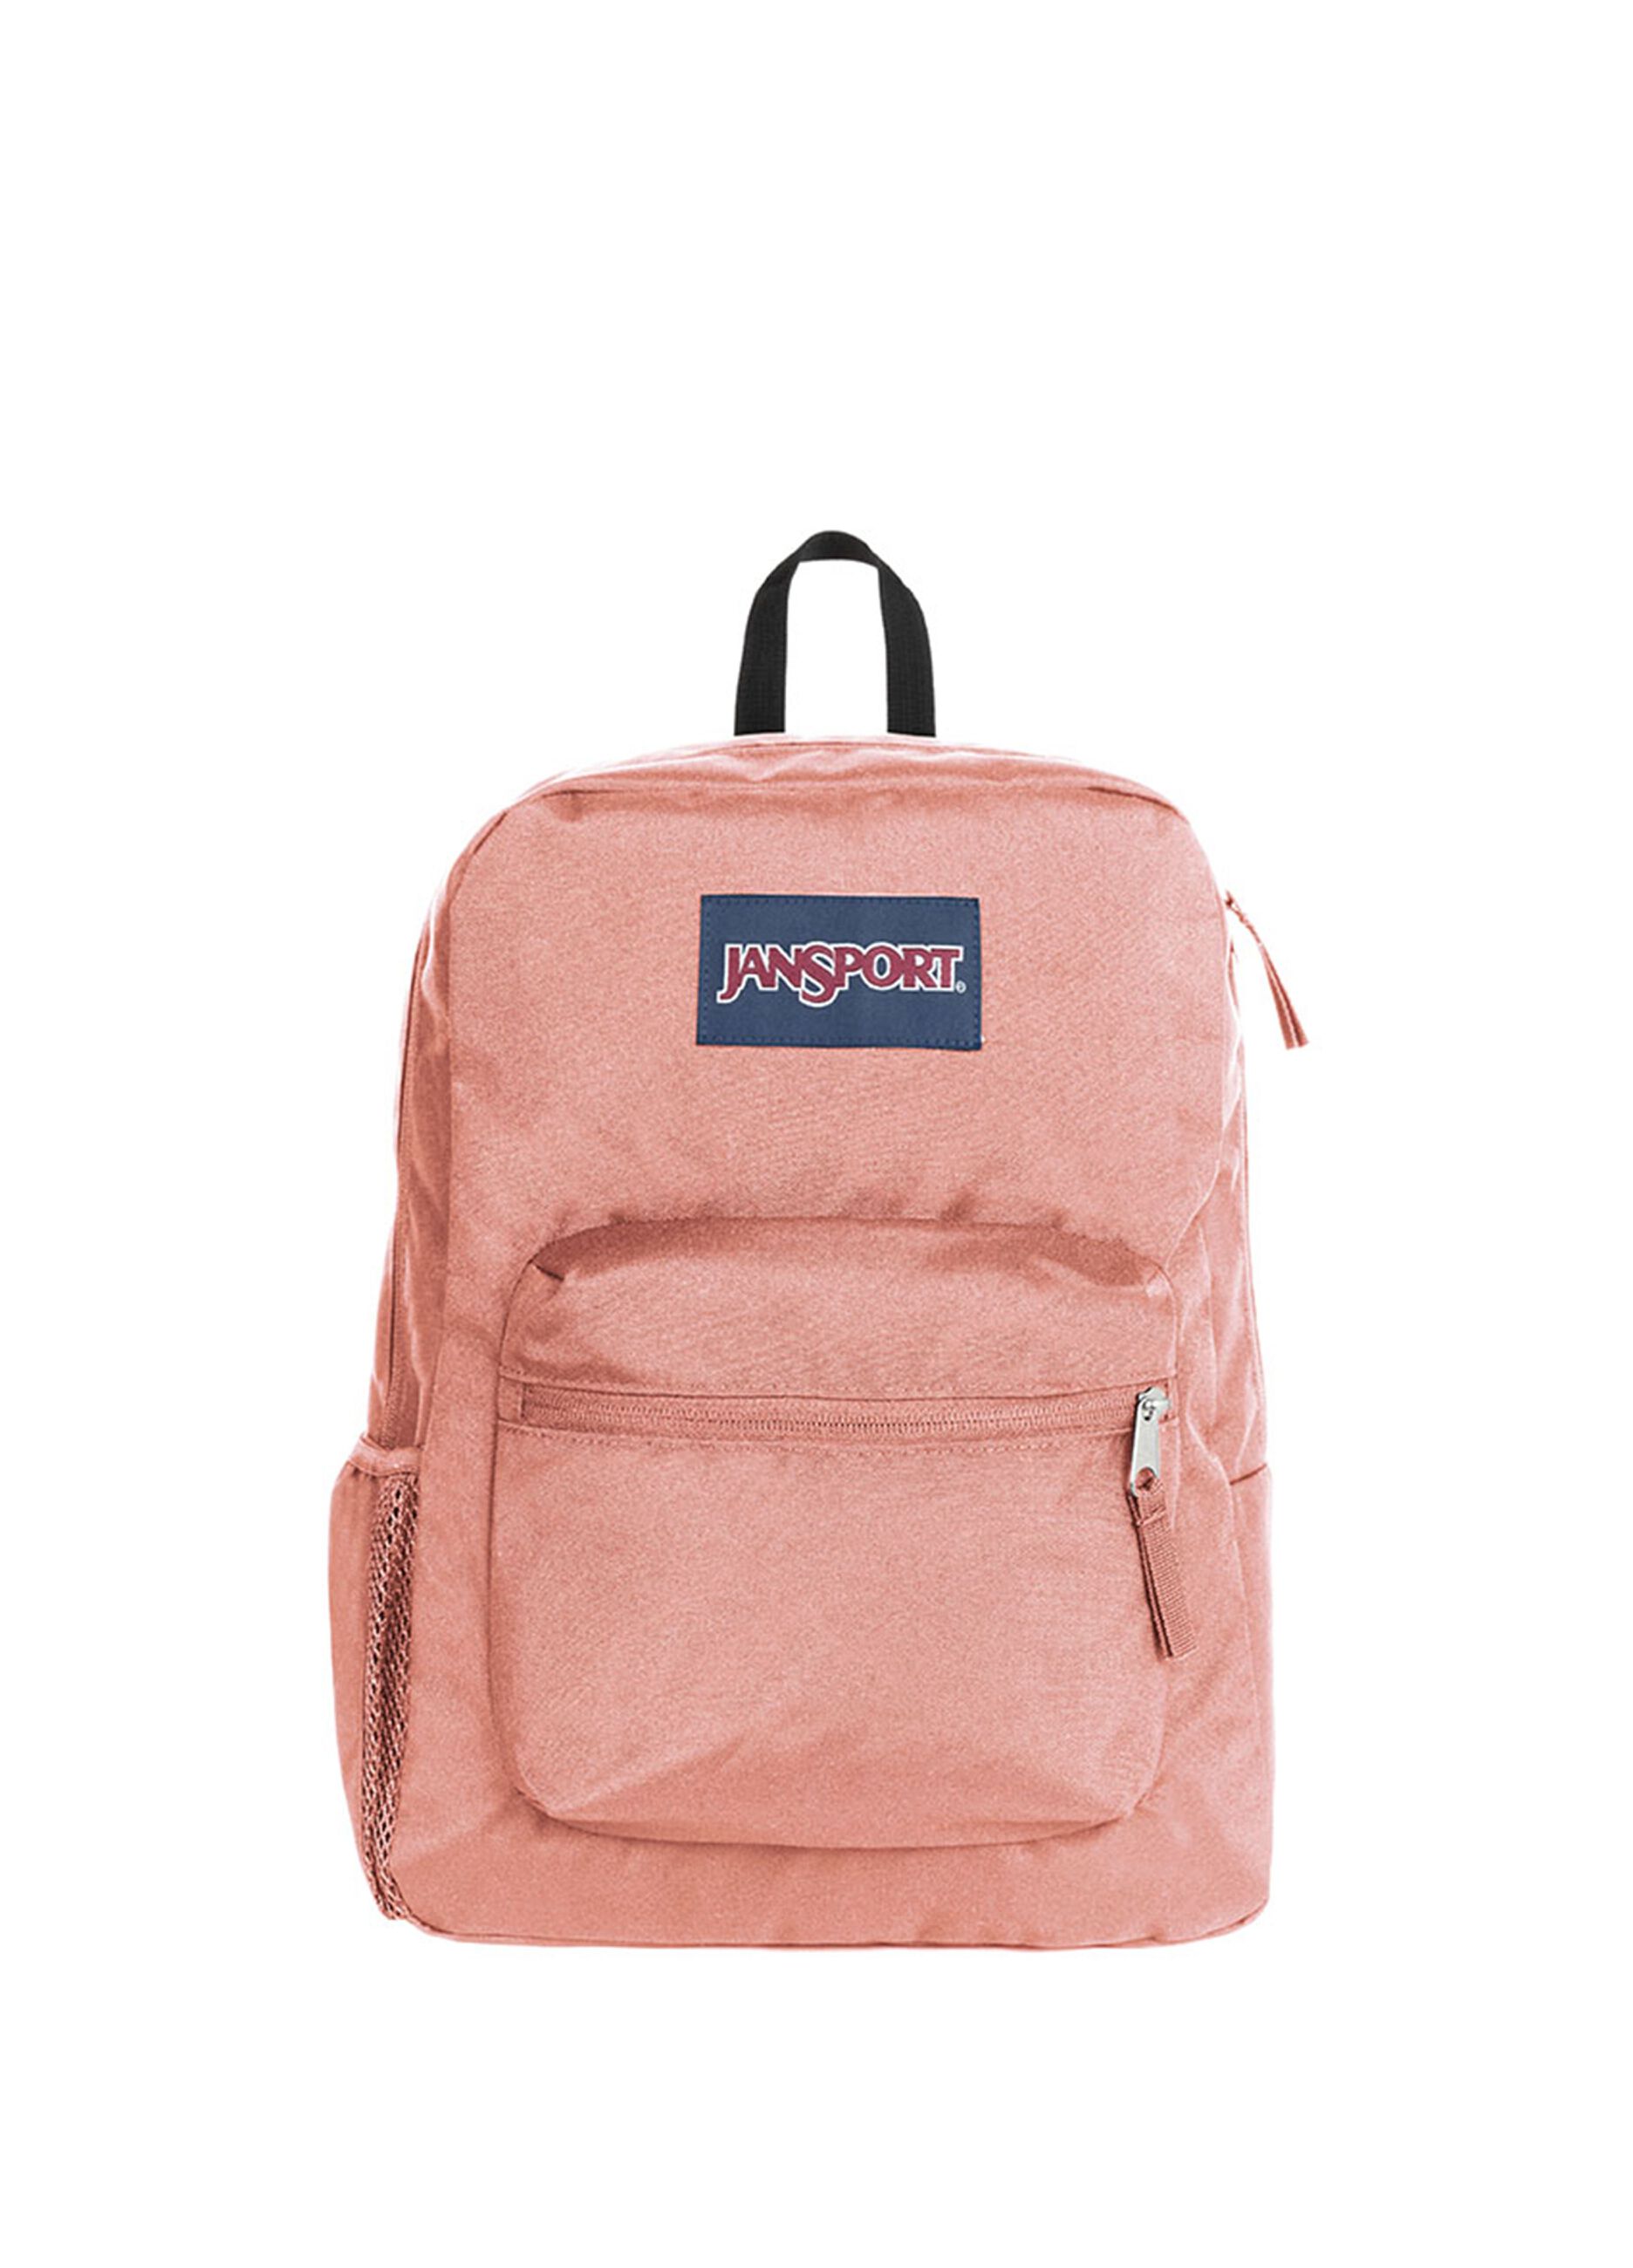 Cross Town backpack in cotton